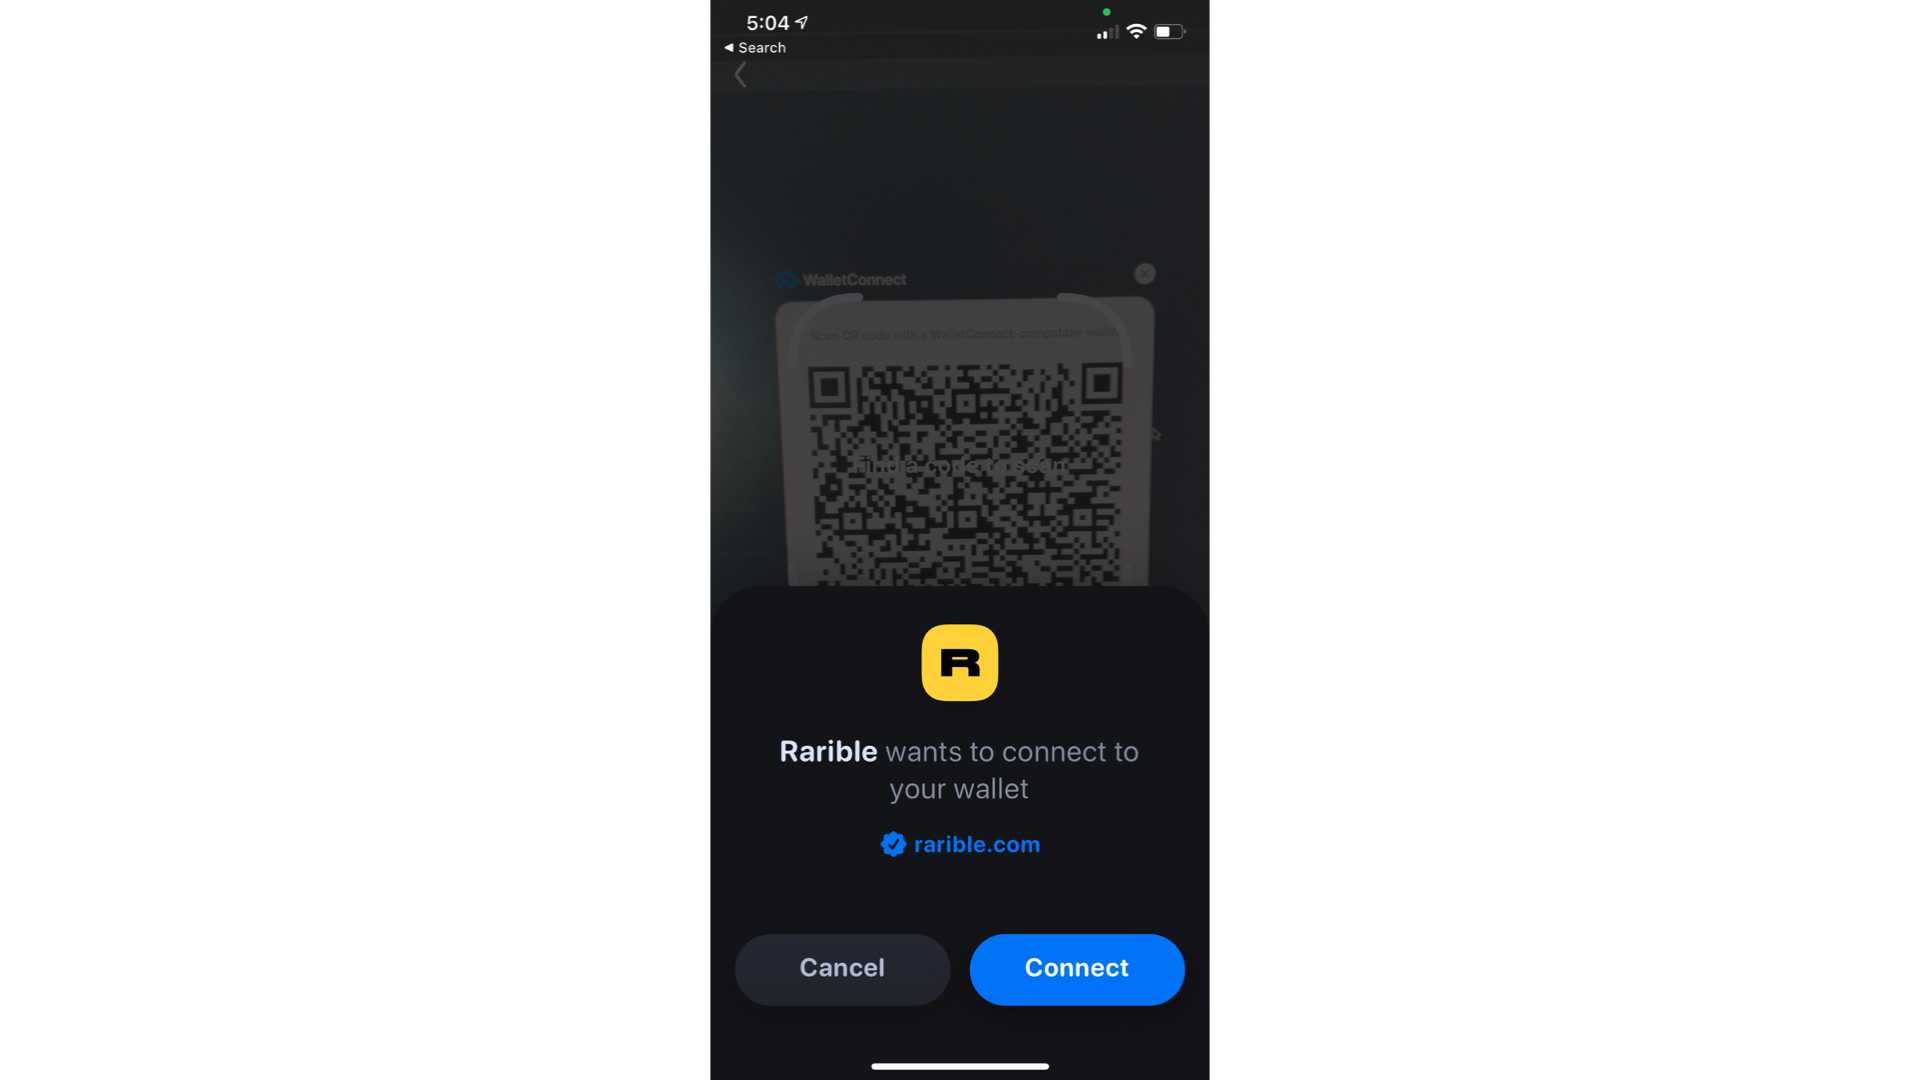 The screen that connects rarible to an Ethereum wallet